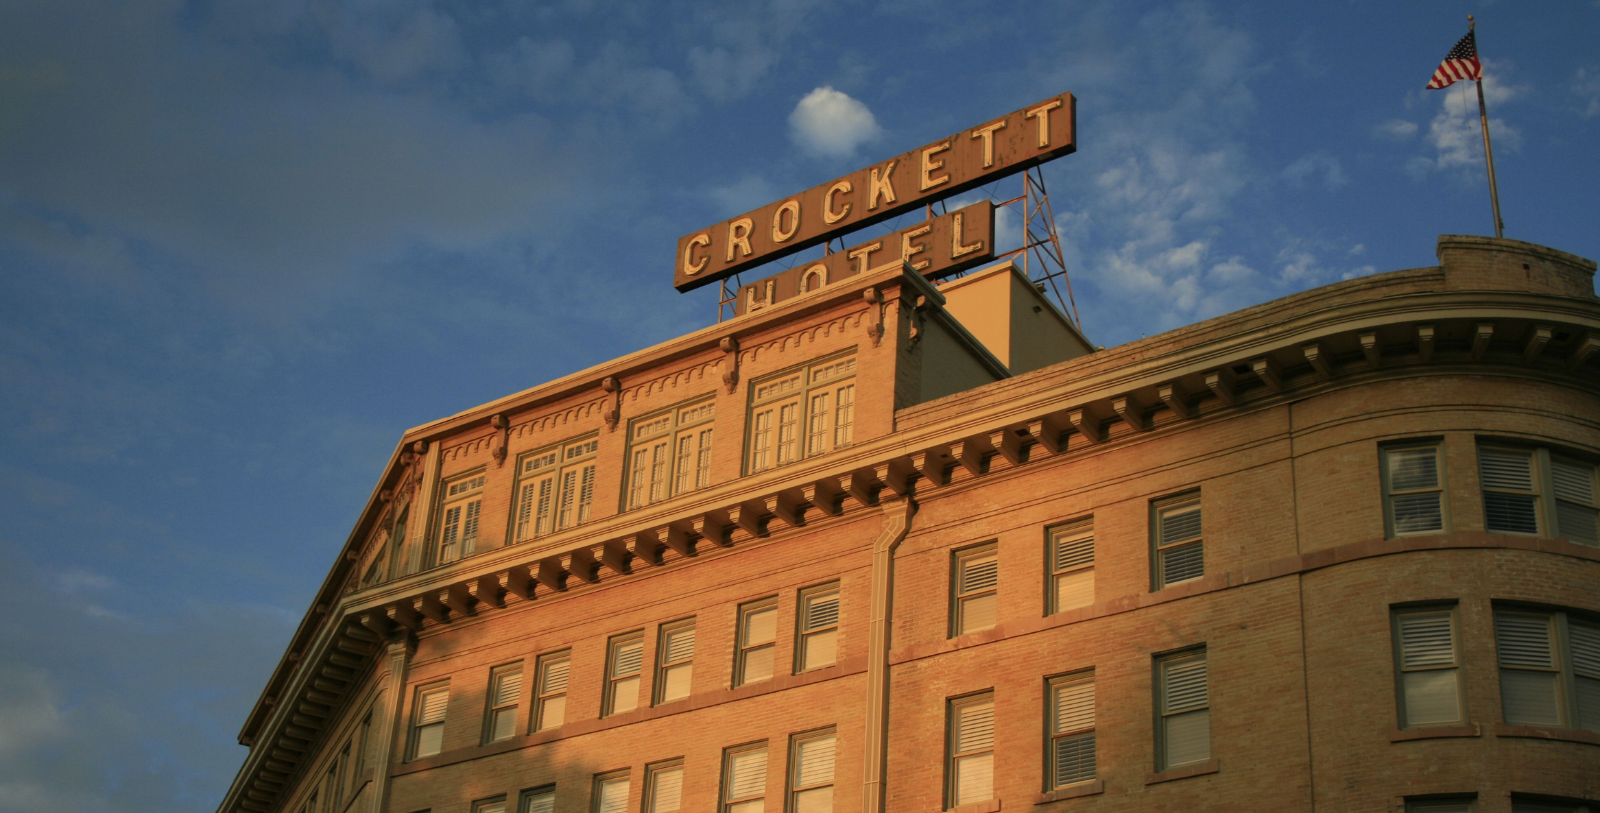 Image of The Crockett Hotel, a member of Historic Hotels of America since 2010, located in San Antonio, Texas